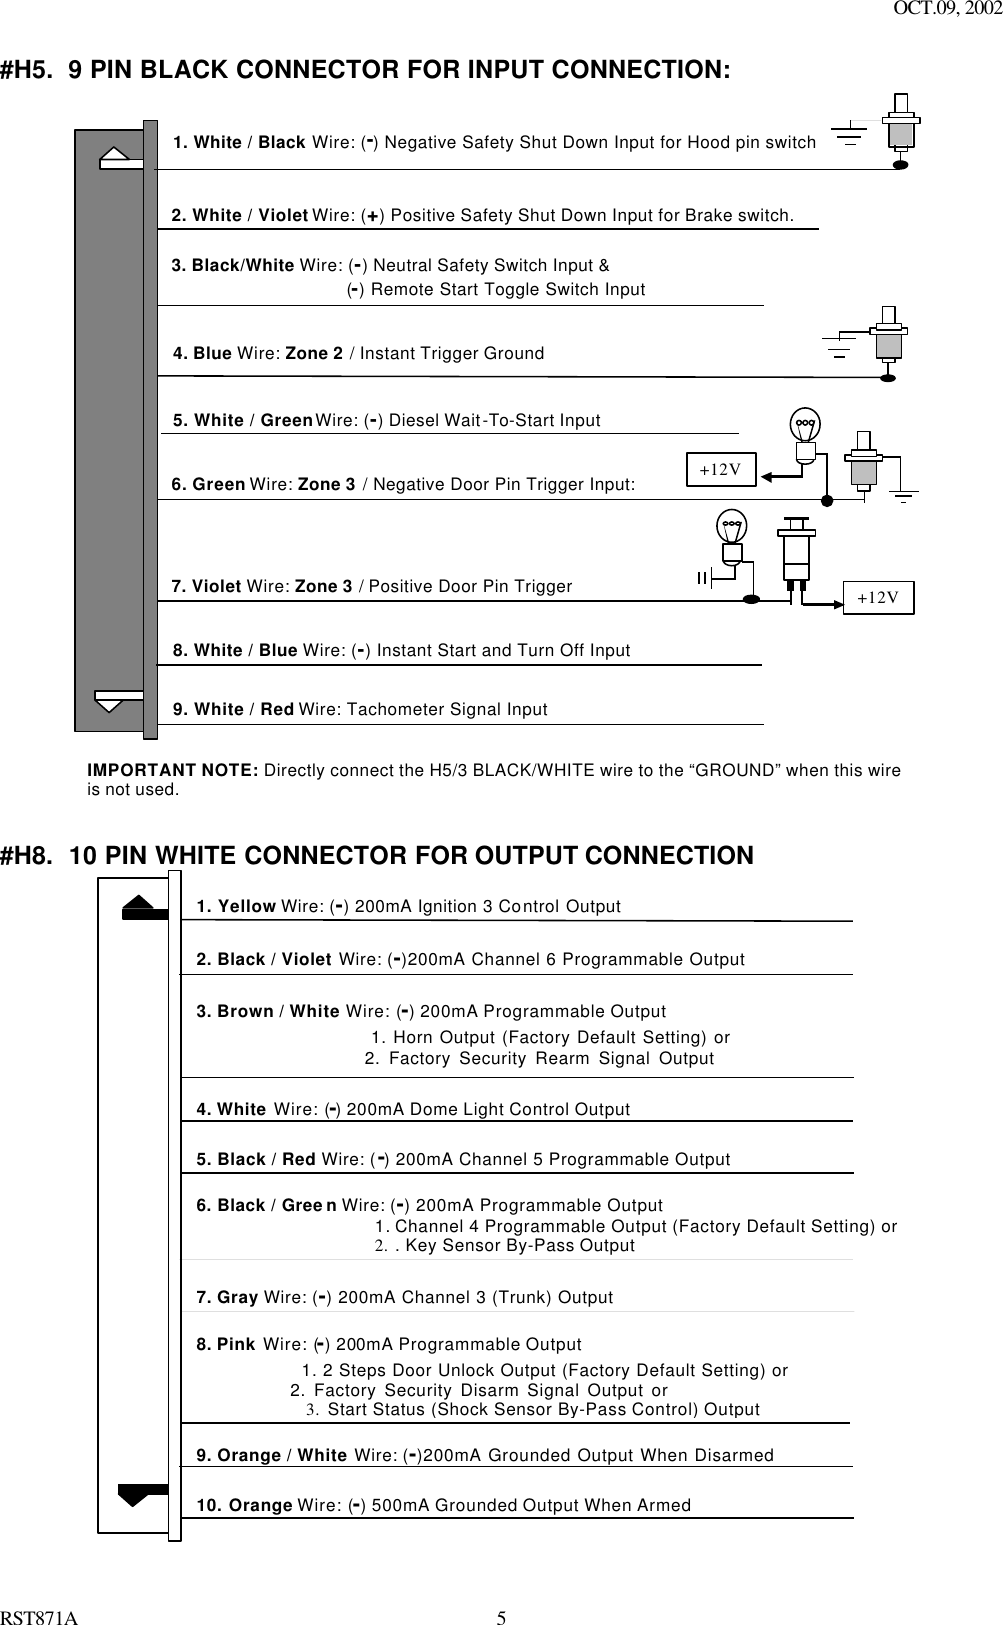 OCT.09, 2002 RST871A 5#H5.  9 PIN BLACK CONNECTOR FOR INPUT CONNECTION:  6. Green Wire: Zone 3 / Negative Door Pin Trigger Input: 4. Blue Wire: Zone 2 / Instant Trigger Ground 7. Violet Wire: Zone 3 / Positive Door Pin Trigger 2. White / Violet Wire: (+) Positive Safety Shut Down Input for Brake switch. 3. Black/White Wire: (-) Neutral Safety Switch Input &amp;    (-) Remote Start Toggle Switch Input   9. White / Red Wire: Tachometer Signal Input +12V 1. White / Black Wire: (-) Negative Safety Shut Down Input for Hood pin switch IMPORTANT NOTE: Directly connect the H5/3 BLACK/WHITE wire to the “GROUND” when this wire is not used. +12V 5. White / Green Wire: (-) Diesel Wait-To-Start Input 8. White / Blue Wire: (-) Instant Start and Turn Off Input   #H8.  10 PIN WHITE CONNECTOR FOR OUTPUT CONNECTION  4. White Wire: (-) 200mA Dome Light Control Output 7. Gray Wire: (-) 200mA Channel 3 (Trunk) Output 10. Orange Wire: (-) 500mA Grounded Output When Armed 1. Yellow Wire: (-) 200mA Ignition 3 Control Output 8. Pink Wire: (-) 200mA Programmable Output     1. 2 Steps Door Unlock Output (Factory Default Setting) or             2. Factory Security Disarm Signal Output or             3. Start Status (Shock Sensor By-Pass Control) Output 3. Brown / White Wire: (-) 200mA Programmable Output       1. Horn Output (Factory Default Setting) or                       2. Factory Security Rearm Signal Output  6. Black / Gree n Wire: (-) 200mA Programmable Output 1. Channel 4 Programmable Output (Factory Default Setting) or 2. . Key Sensor By-Pass Output 2. Black / Violet Wire: (-)200mA Channel 6 Programmable Output  5. Black / Red Wire: (-) 200mA Channel 5 Programmable Output 9. Orange / White Wire: (-)200mA Grounded Output When Disarmed    